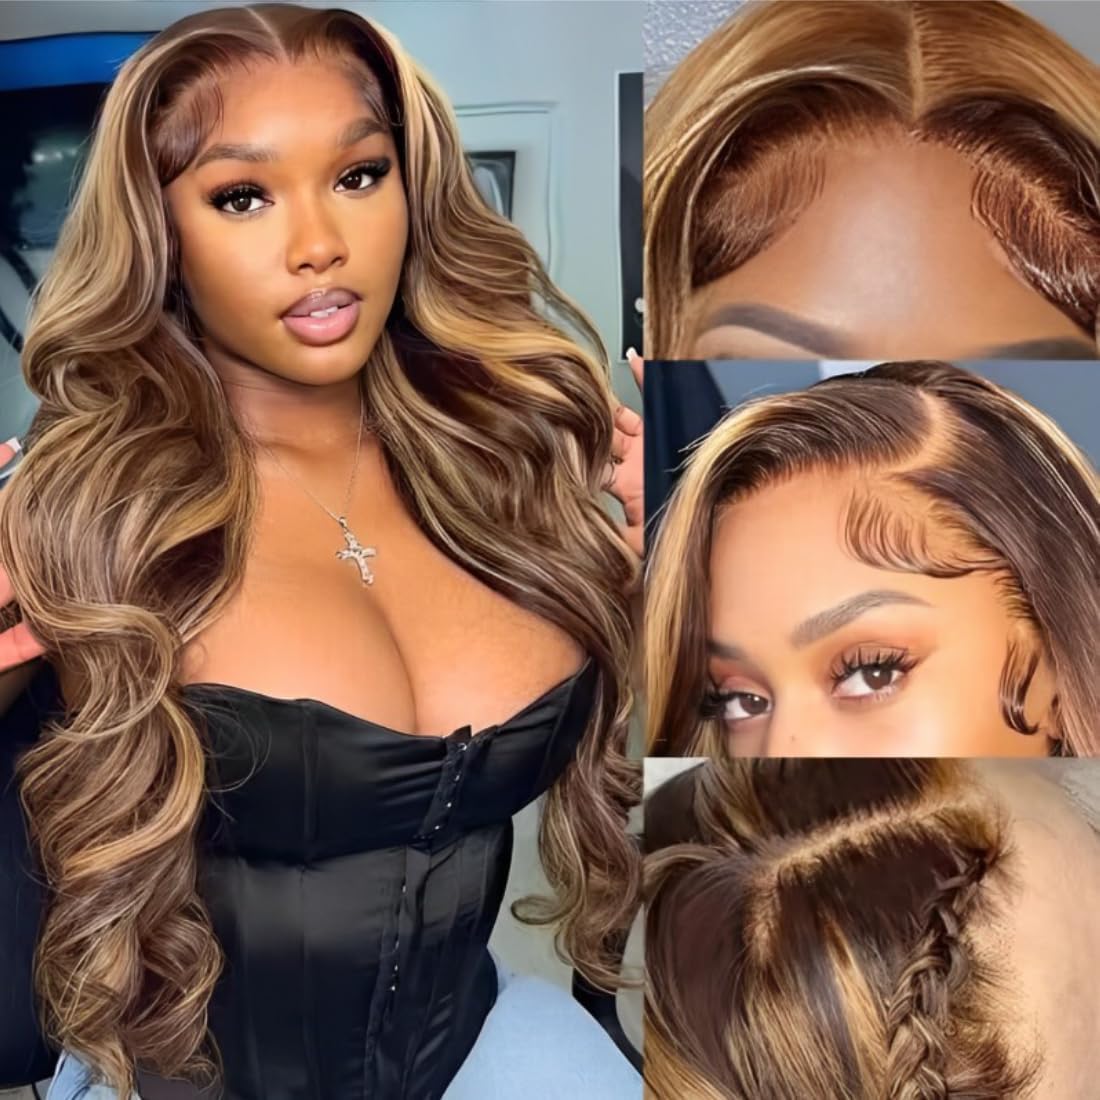 UNICE Bye Bye Knots Glueless Wig Body Wave 7x5 Invisible Knots Lace Front Wigs Human Hair Honey Blonde Highlight Pre Everything Wig Human Hair Pre Plucked Pre Cut 150% Density 22 inch